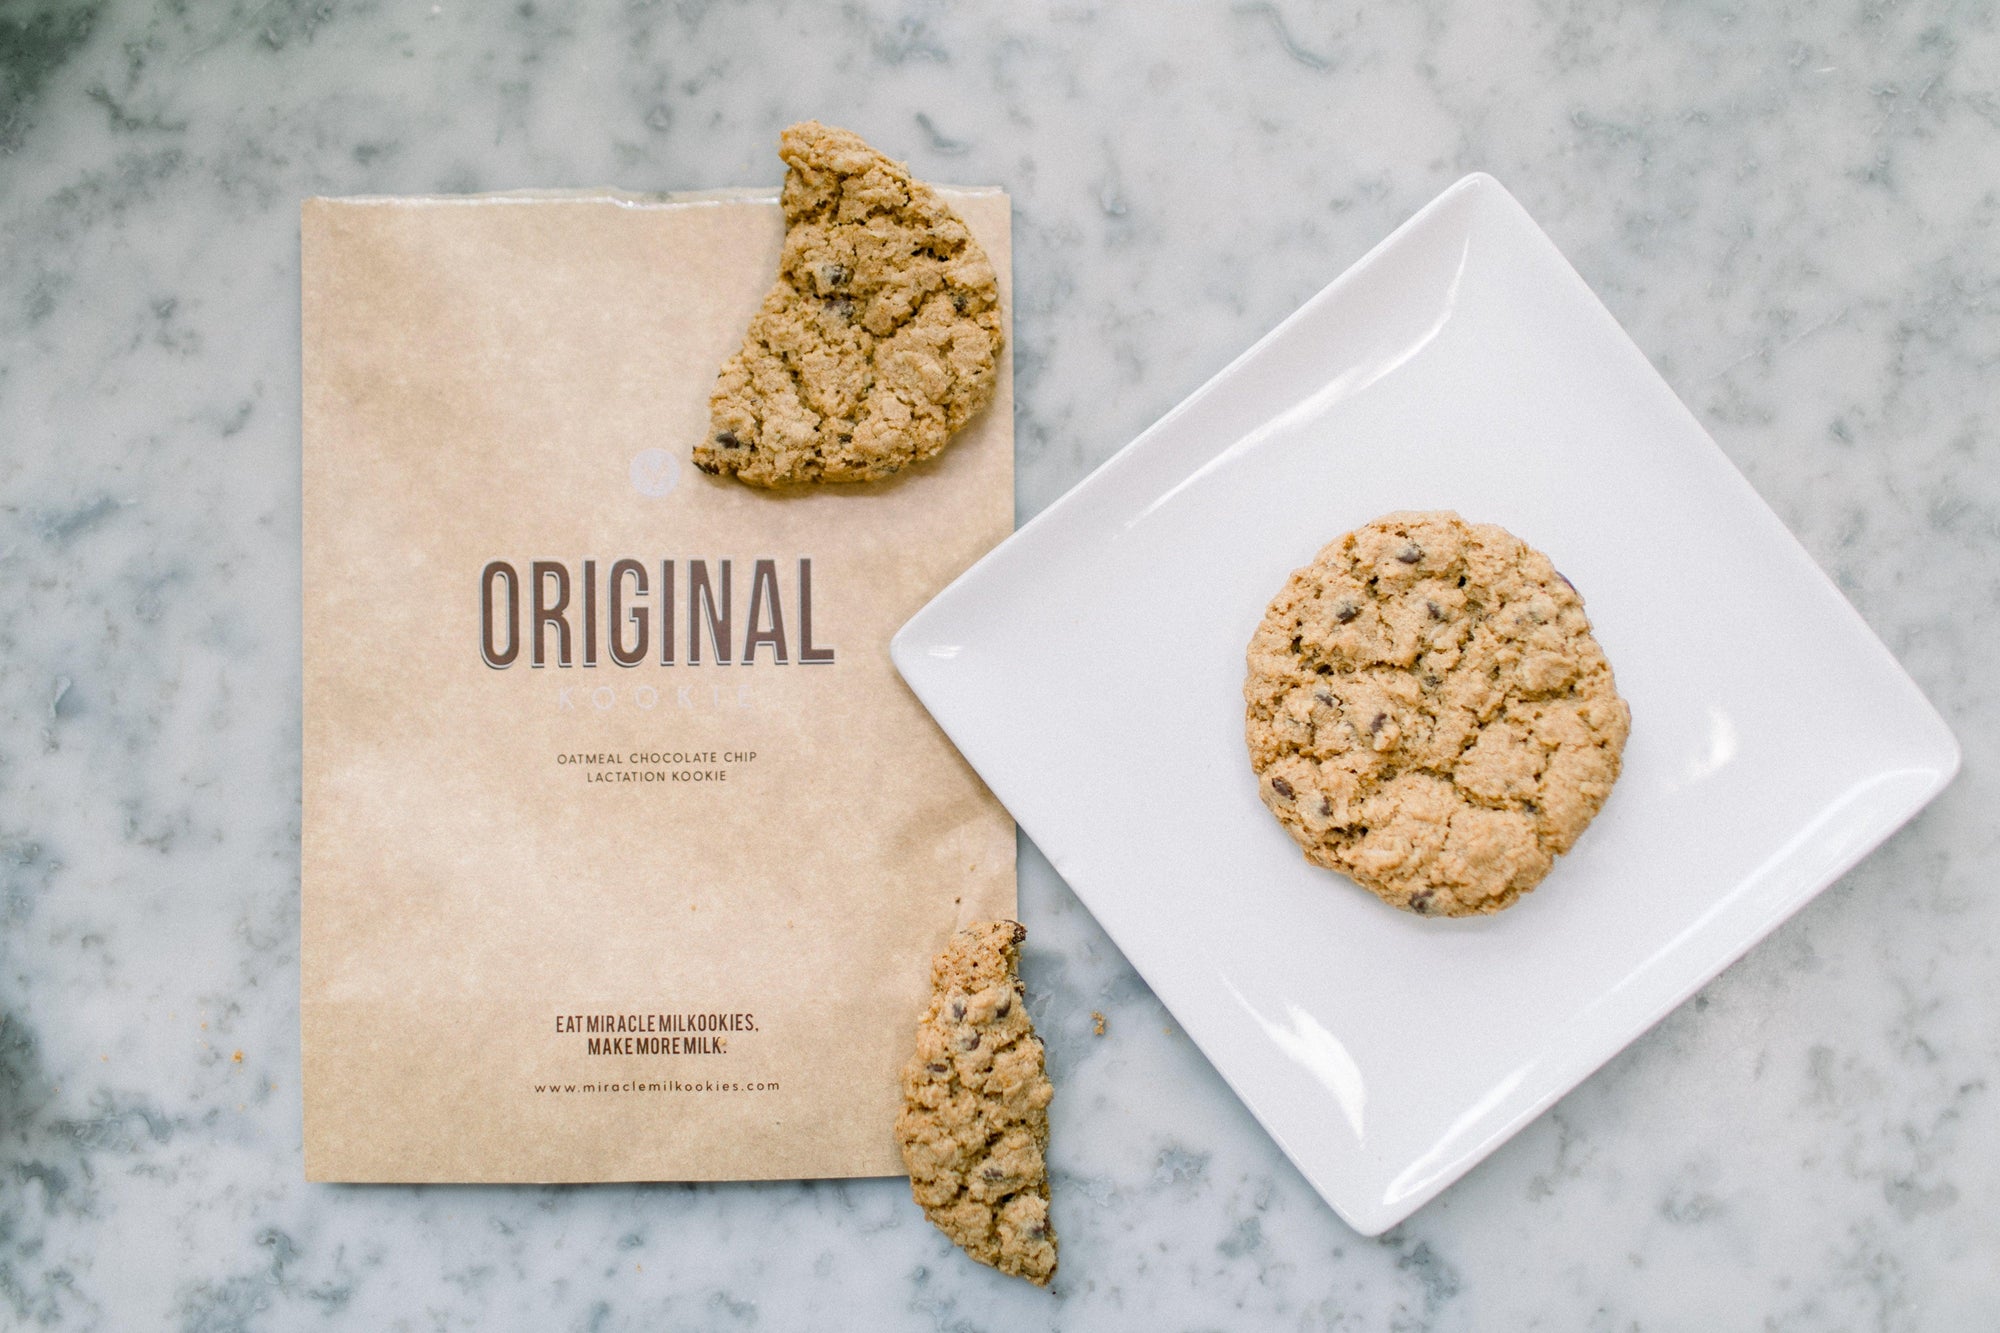 One Month Supply of Lactation Cookies - Top Seller! - Miracle Milkookies